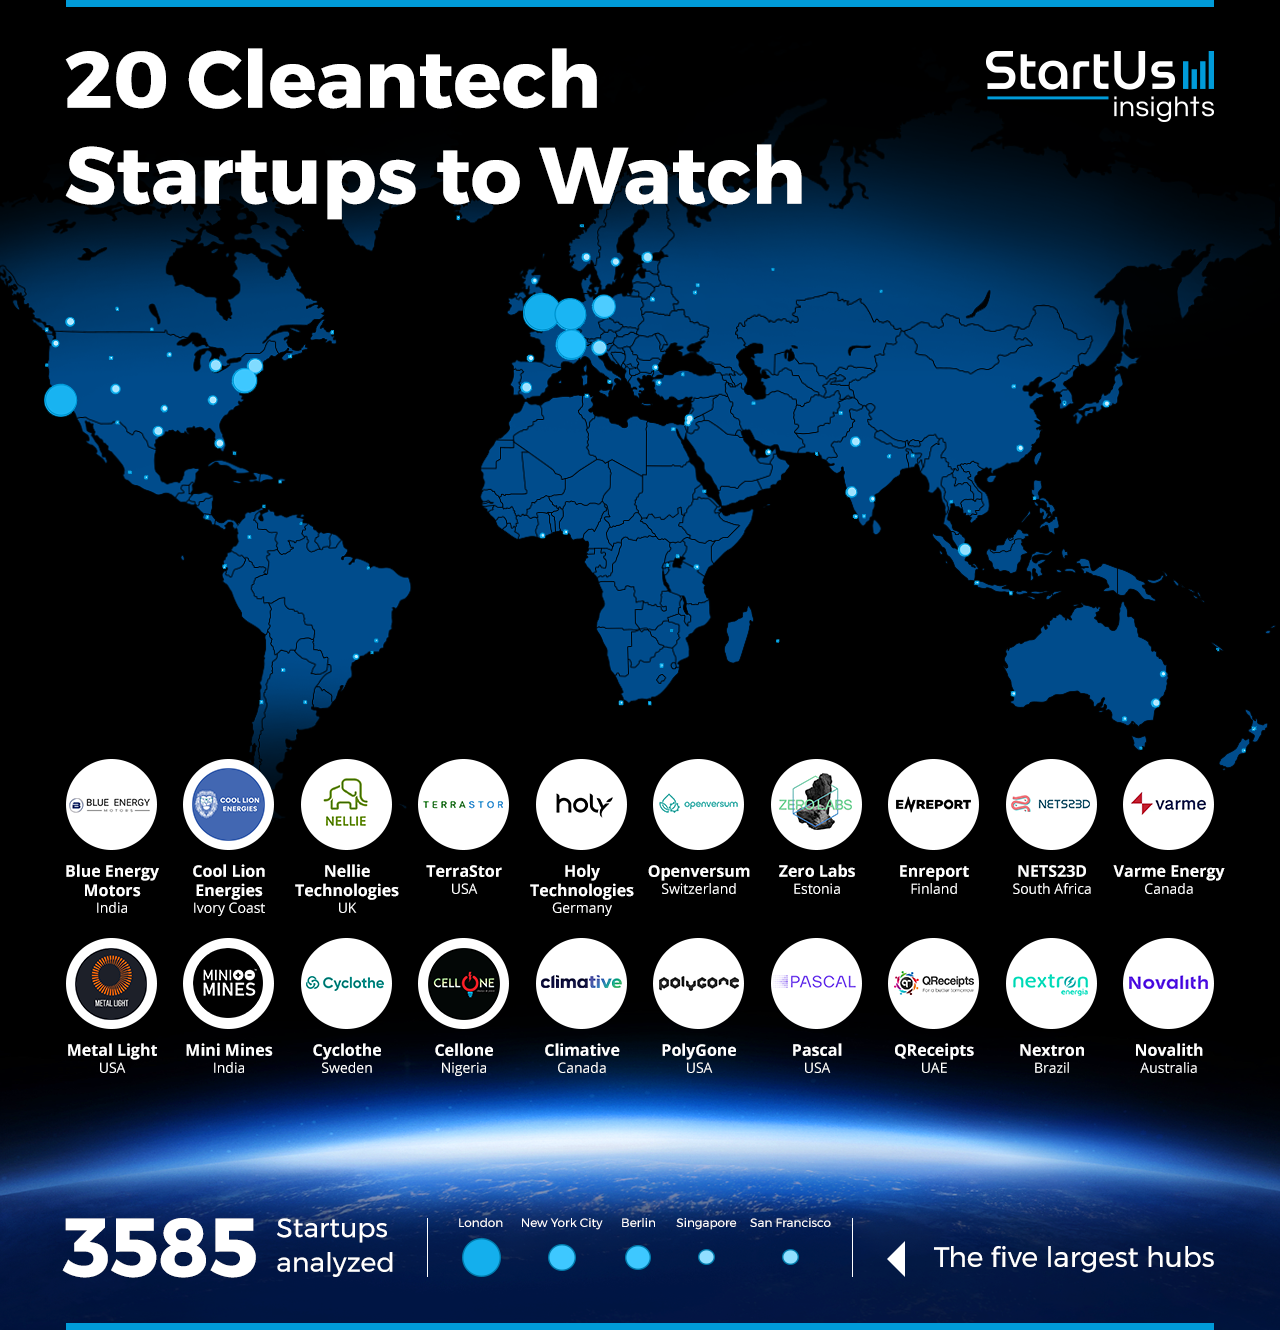 Cleantech Startups to Watch | StartUs Insights